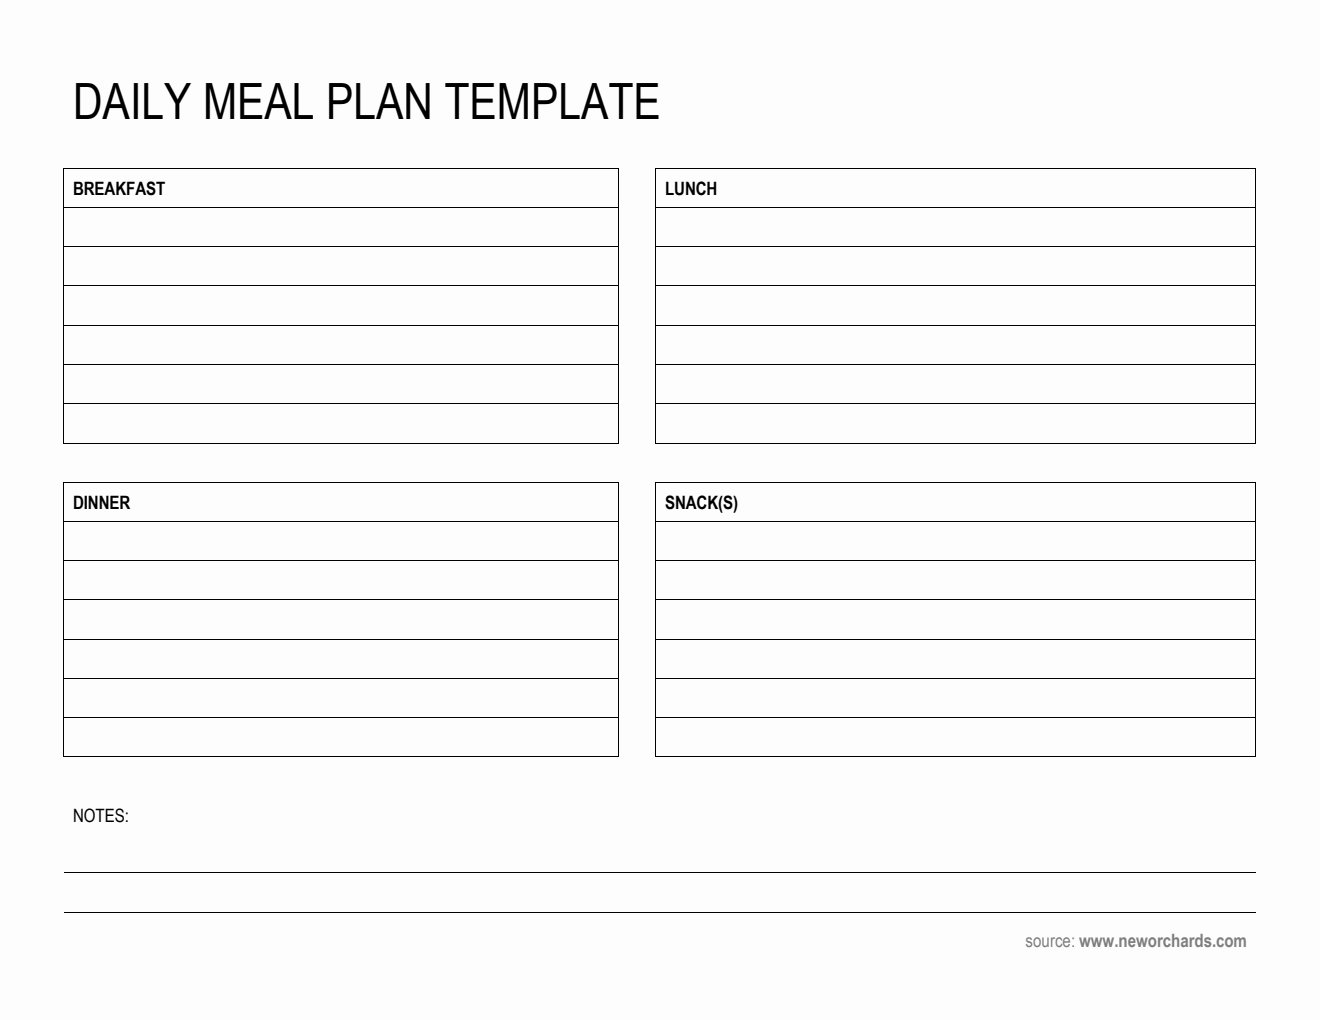 Printable Daily Meal Plan Template in PDF